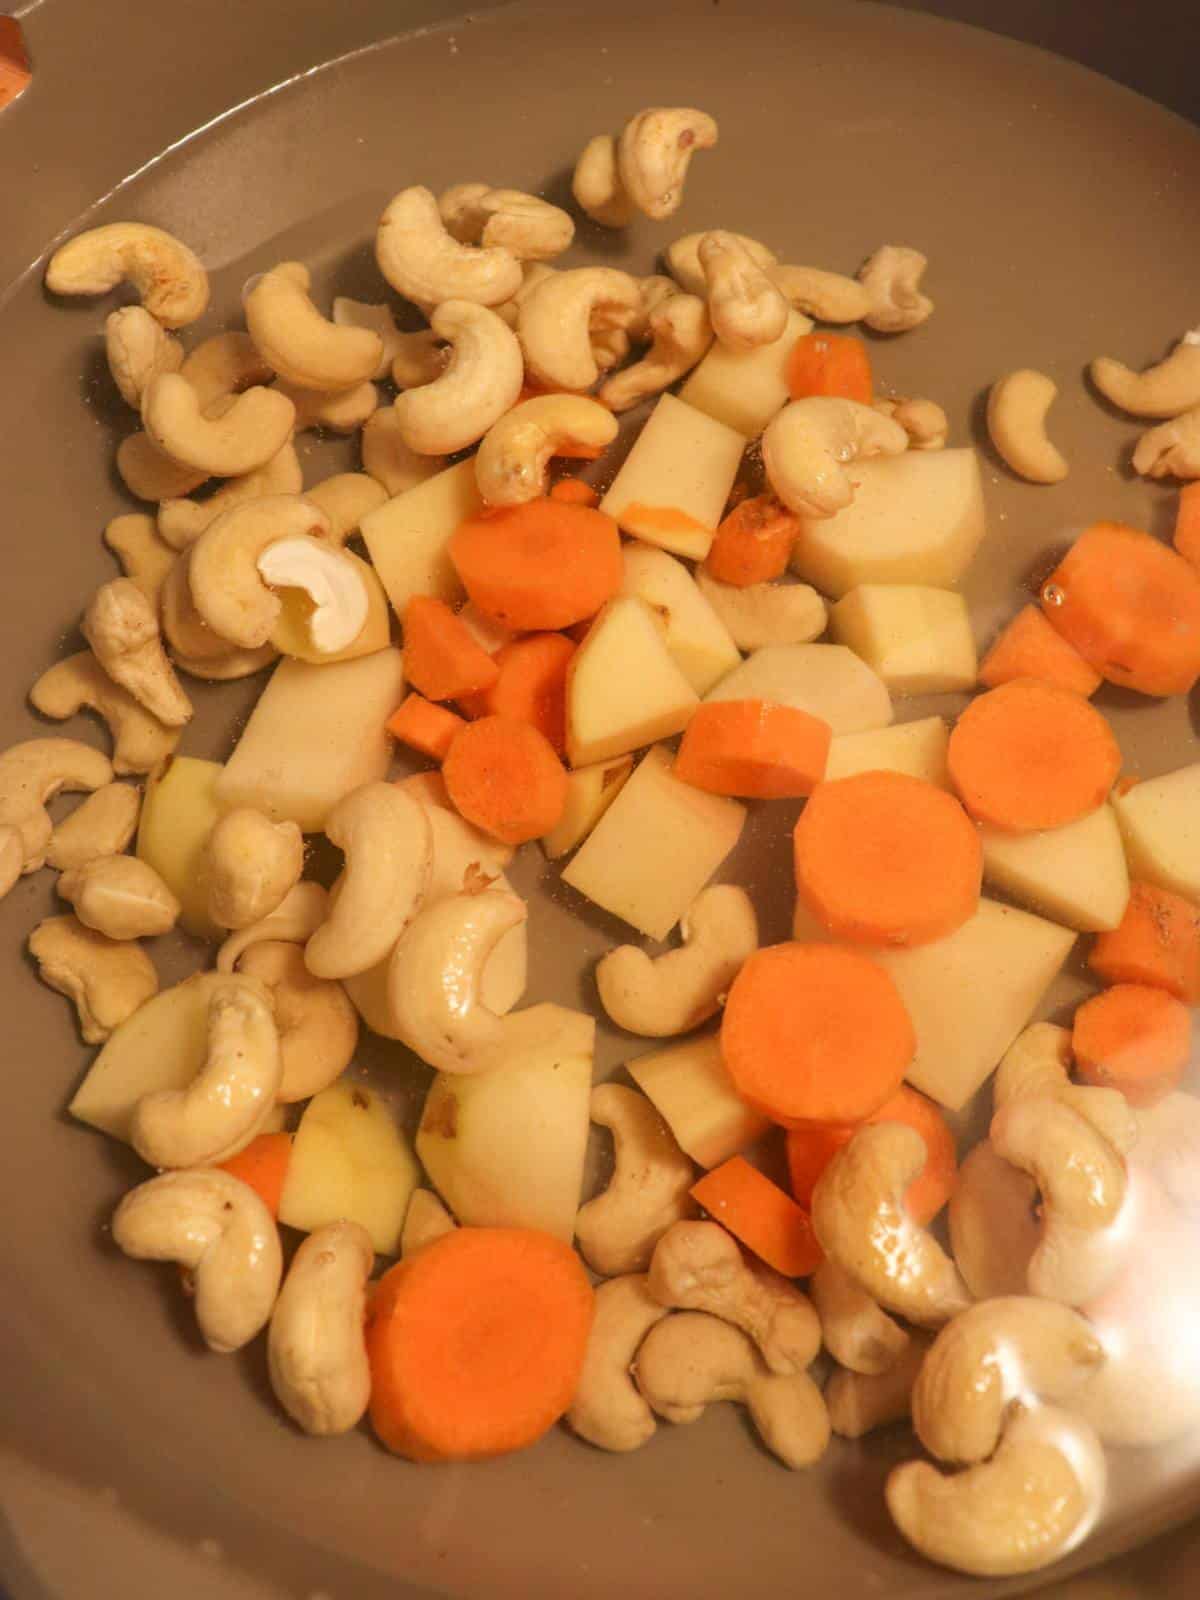 Raw cashews, potatoes and carrots simmering in a pan on the stove.